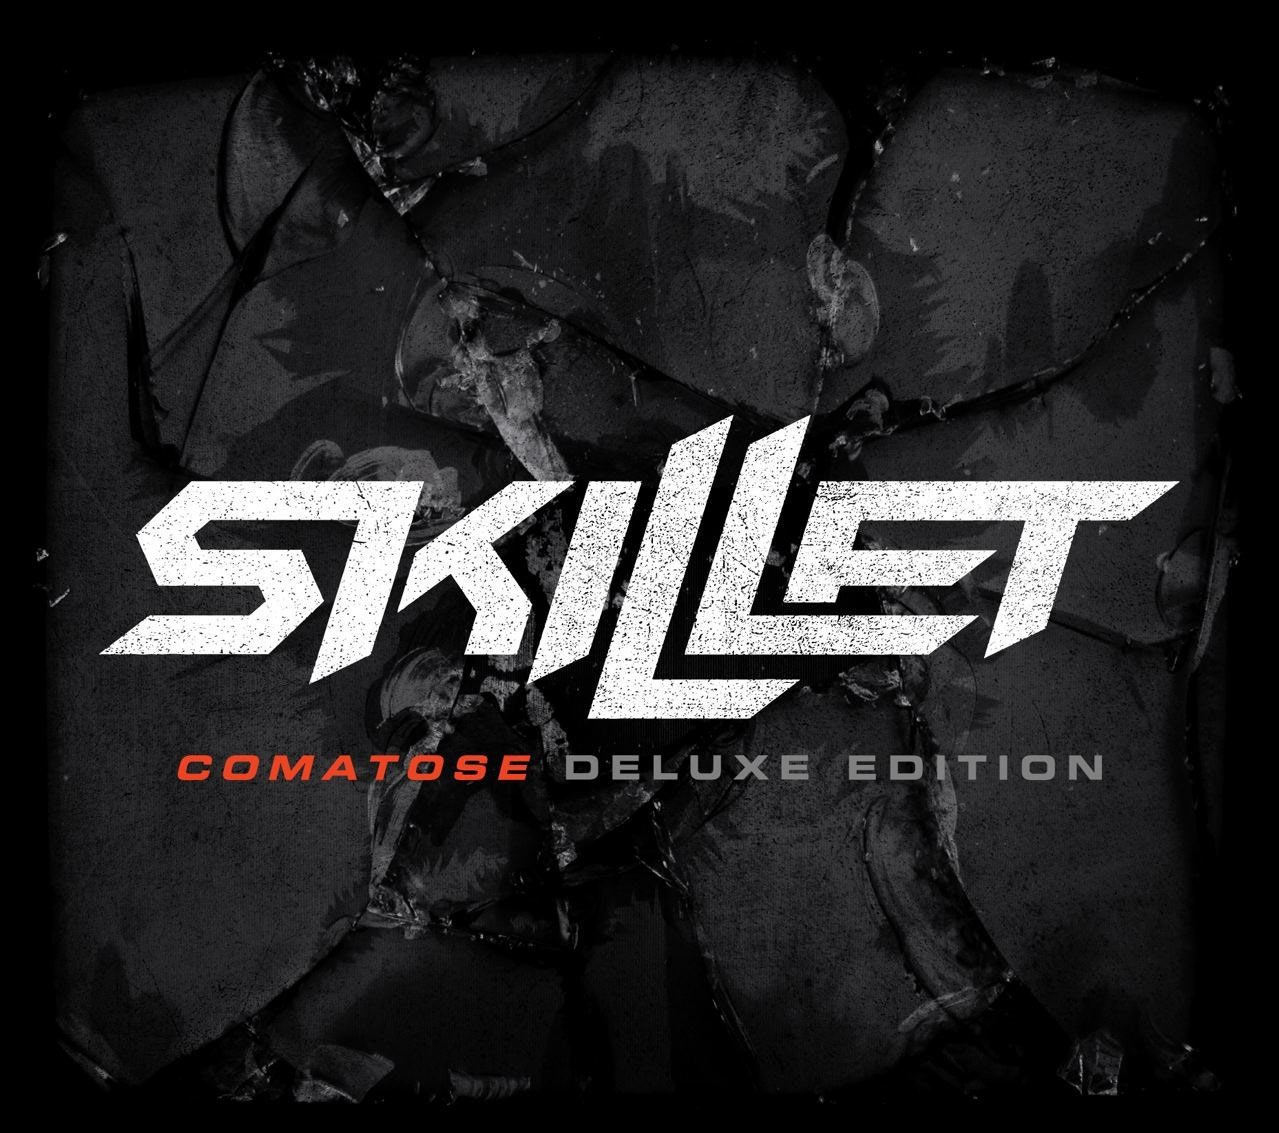 Skillet, "Comatose: Deluxe Edition" Review